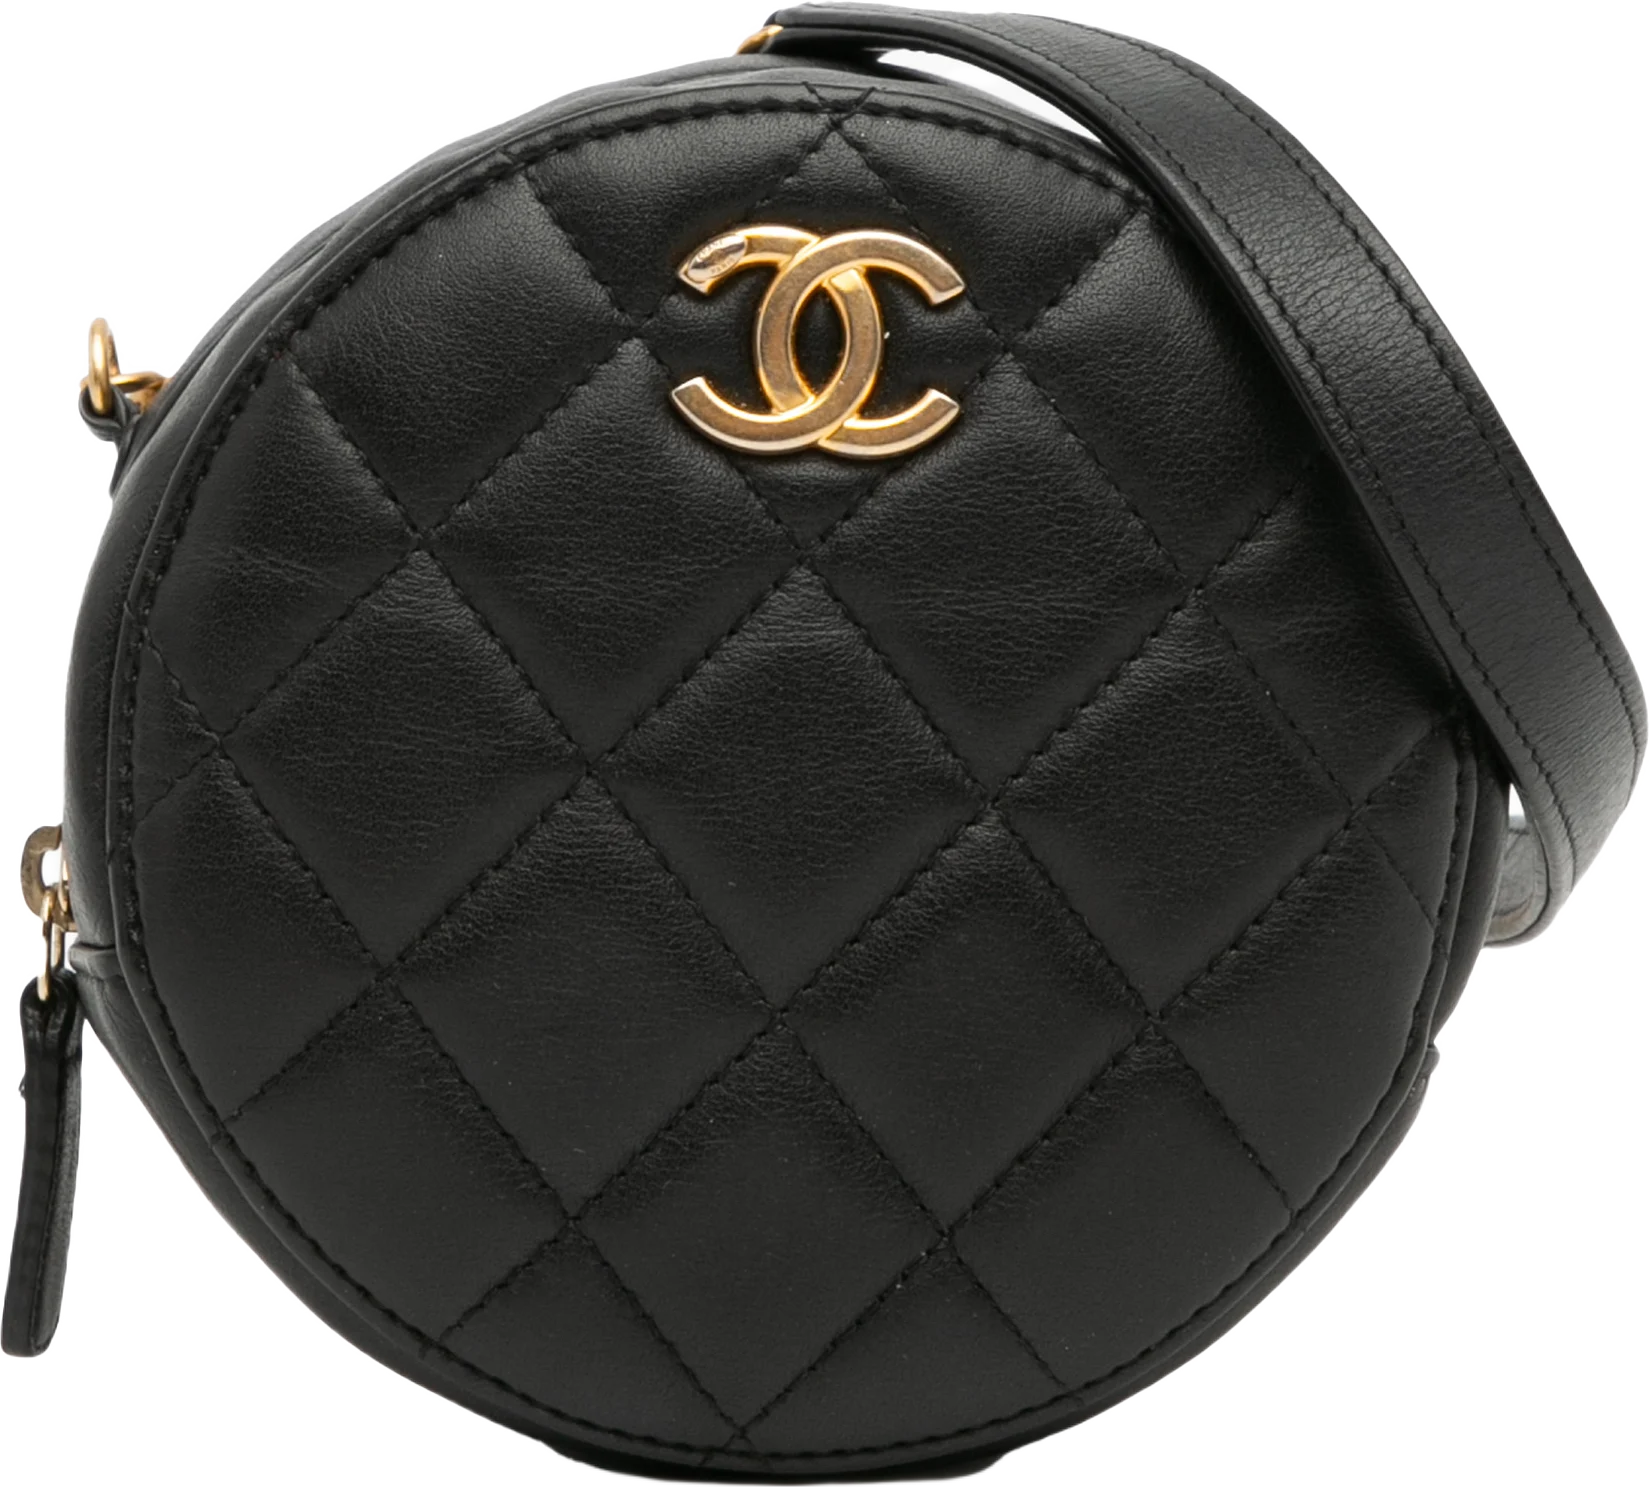 Chanel Quilted Calfskin About Pearls Round Clutch With Chain